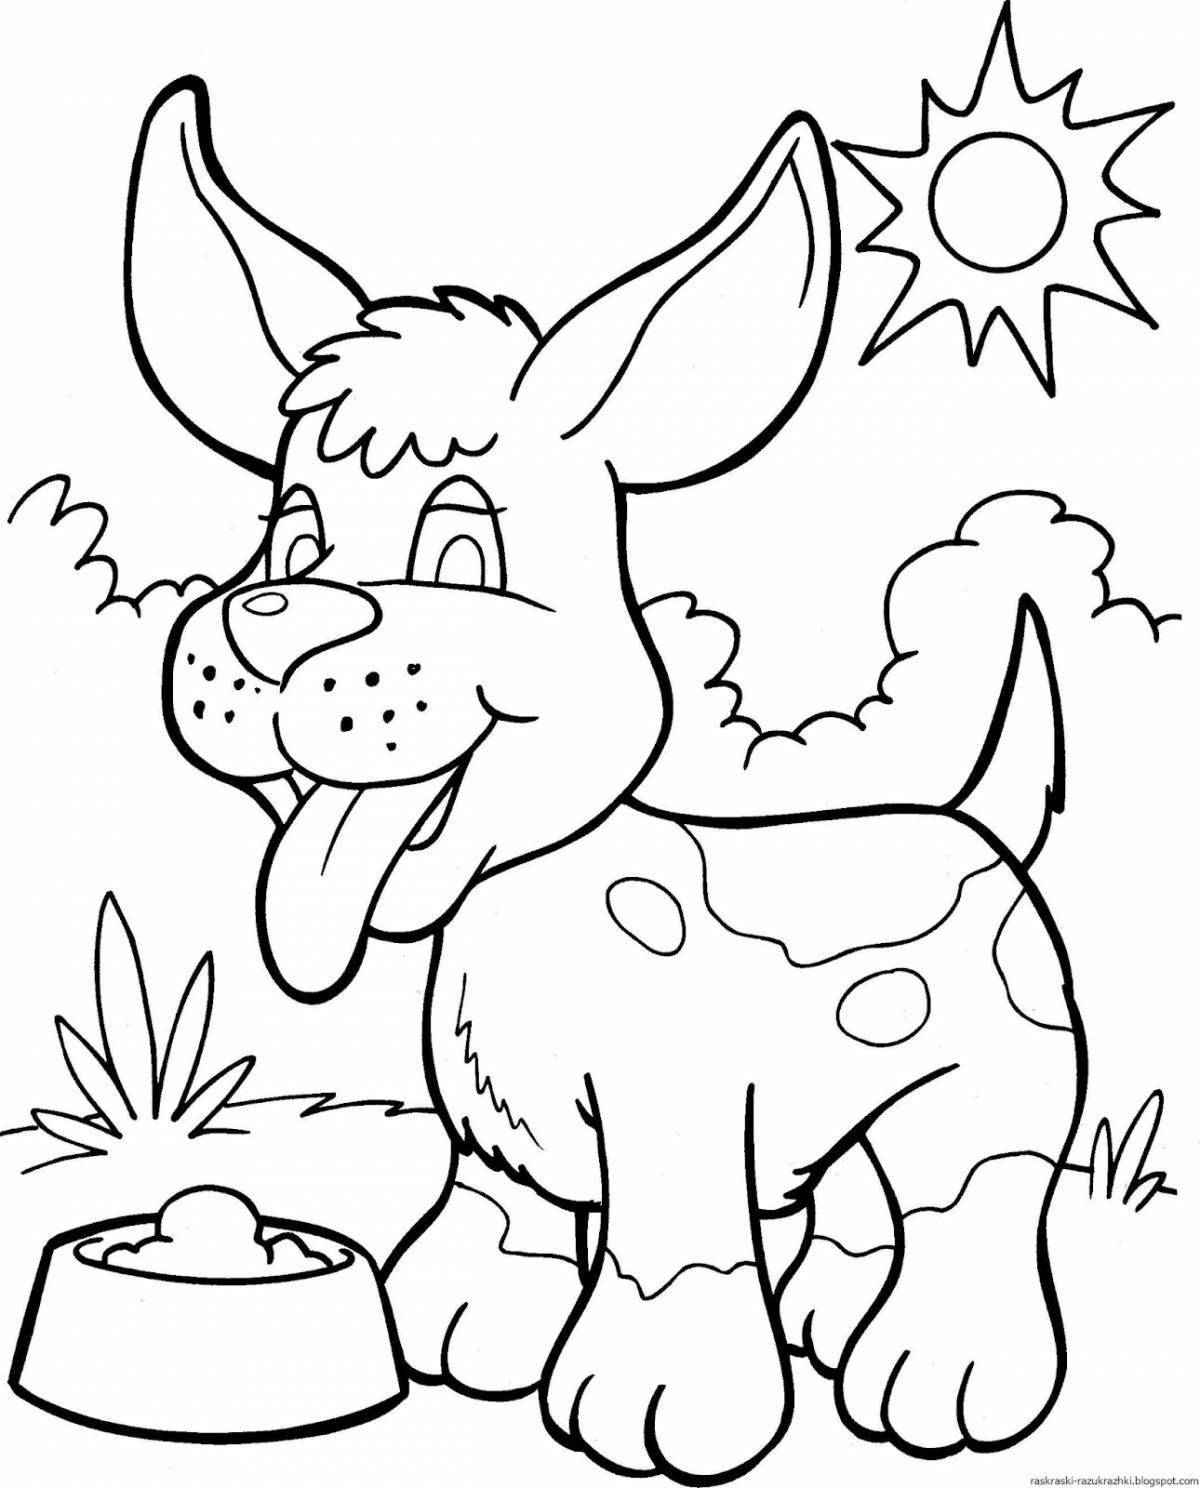 Colour-obsessed animal coloring pages for 6-7 year olds